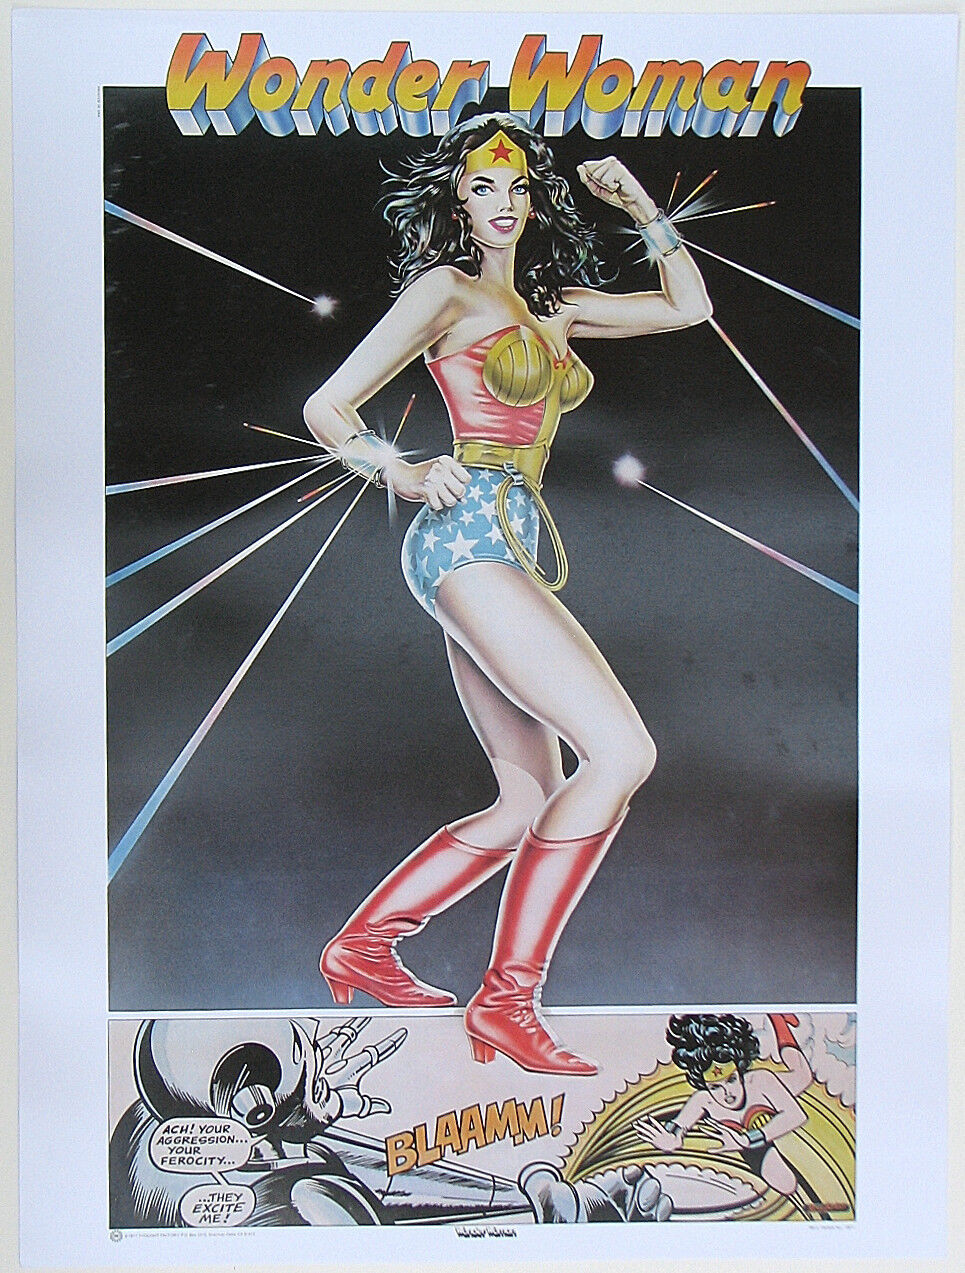 WONDER WOMAN POSTER Thought Factory 1977 DC